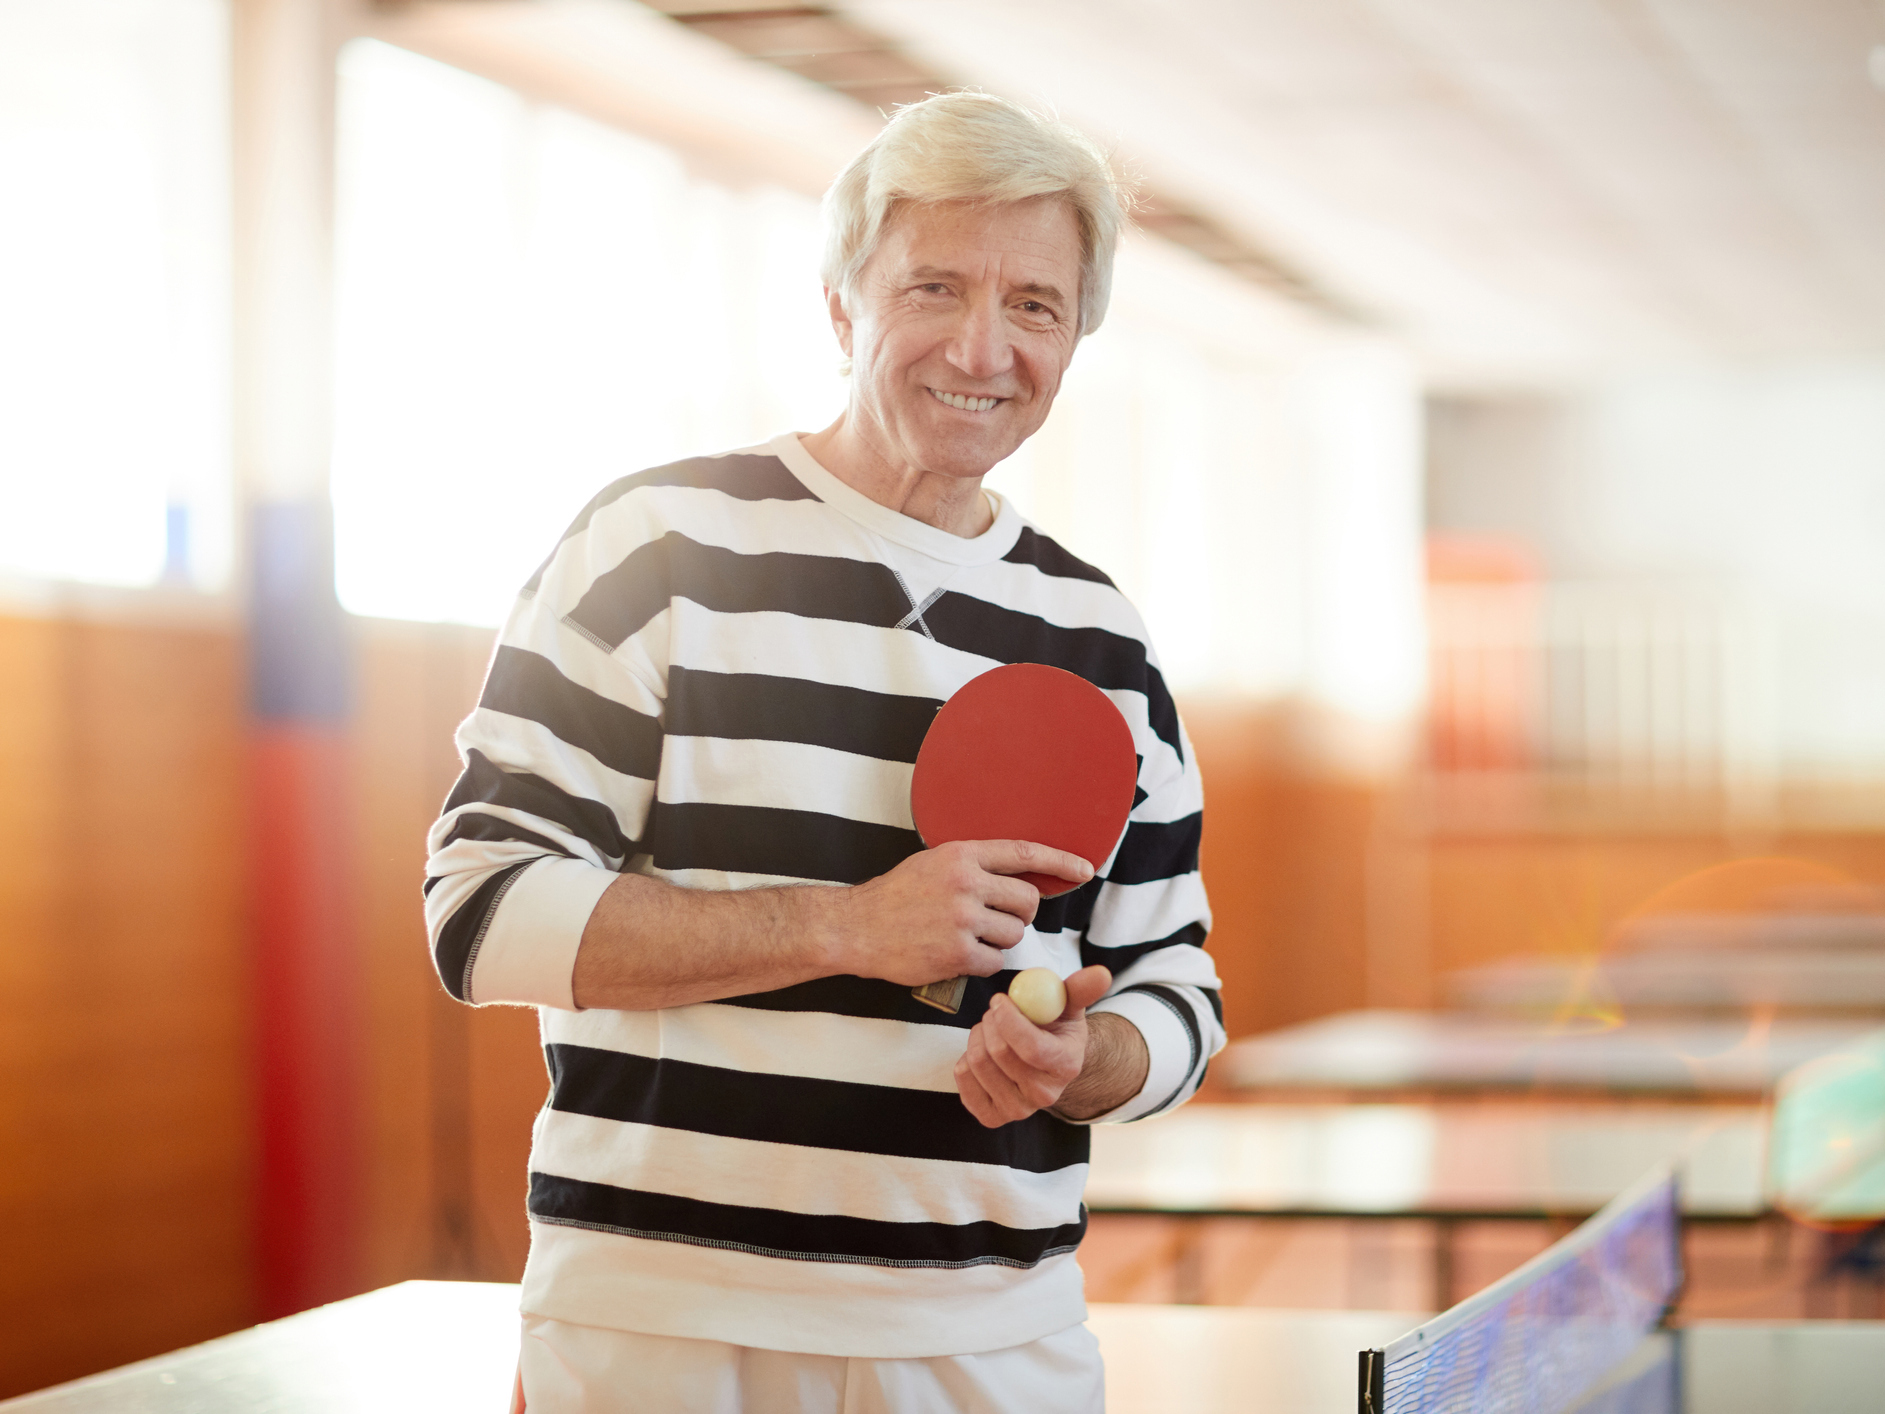 How playing ping pong reverses symptoms of Parkinson’s disease